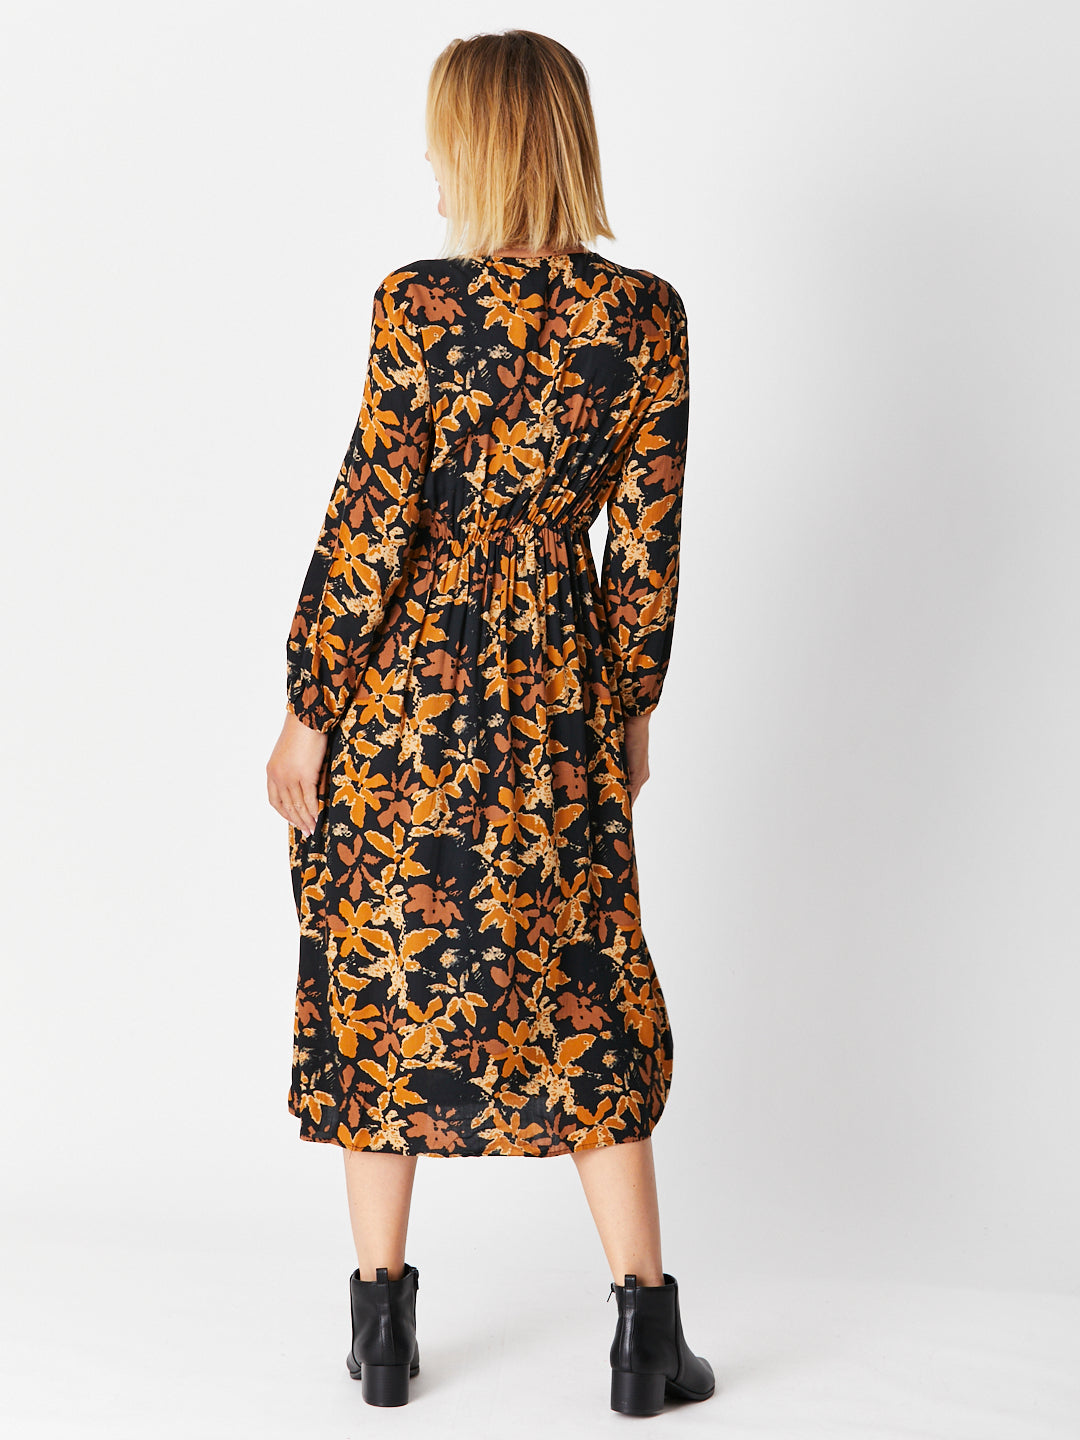 Toffee Floral Dress